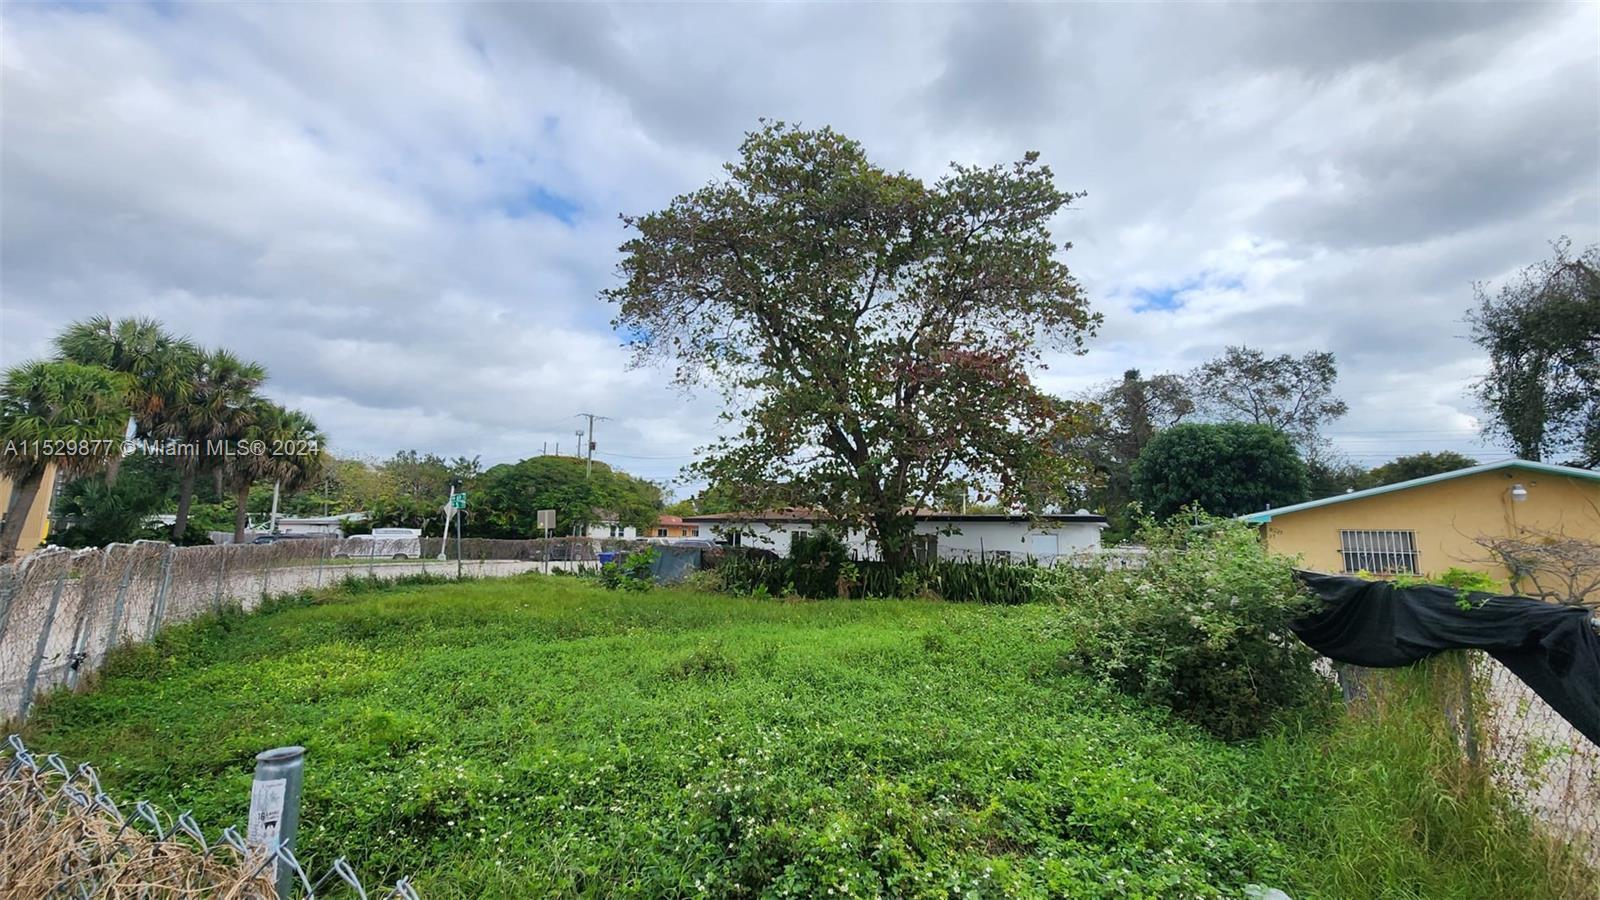 Photo of 540 NW 69th St in Miami, FL